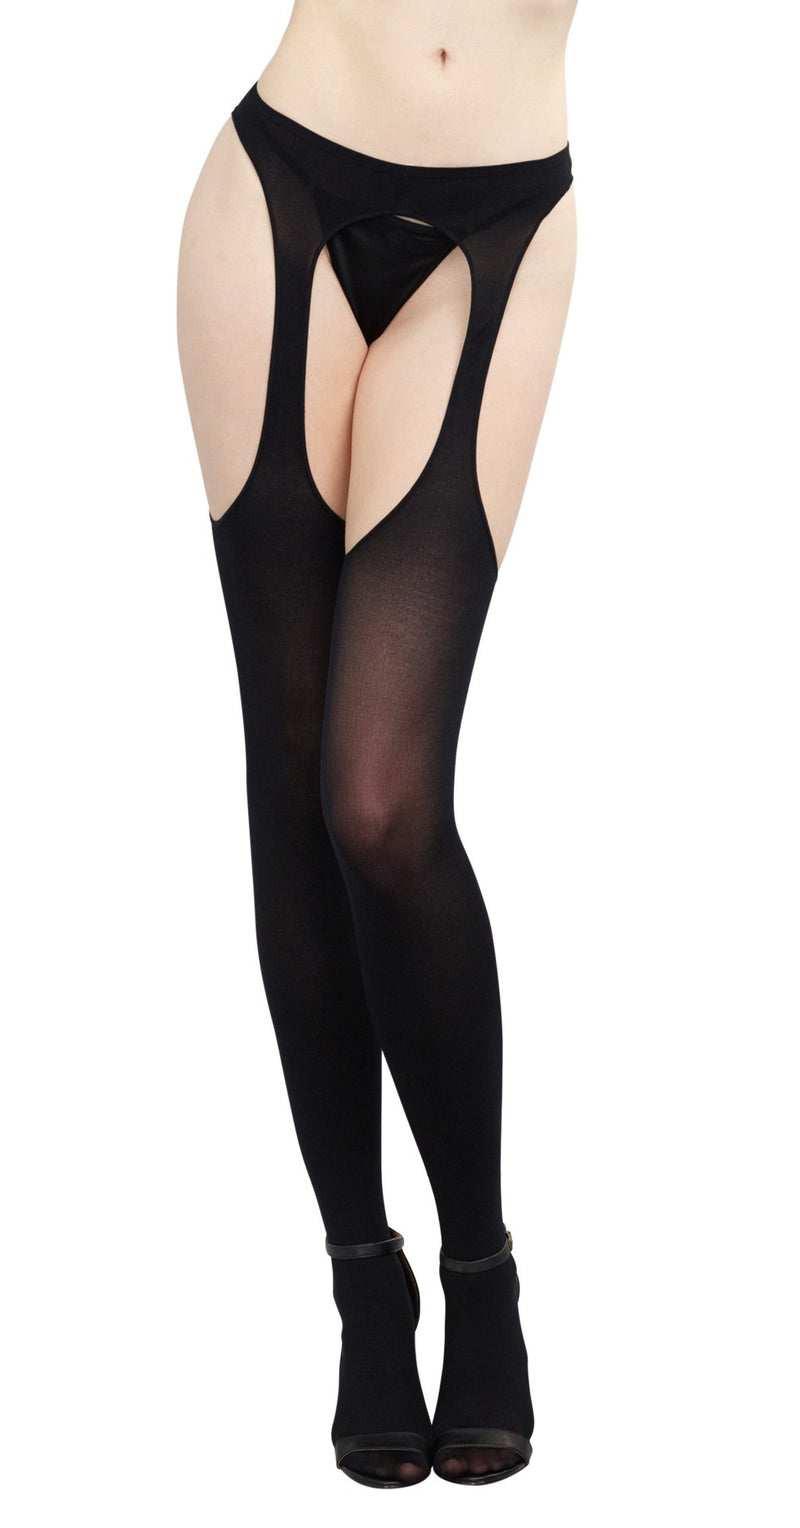 Semi Opaque Suspender Pantyhose: Add Heat and Mystery to Your Lingerie Collection!